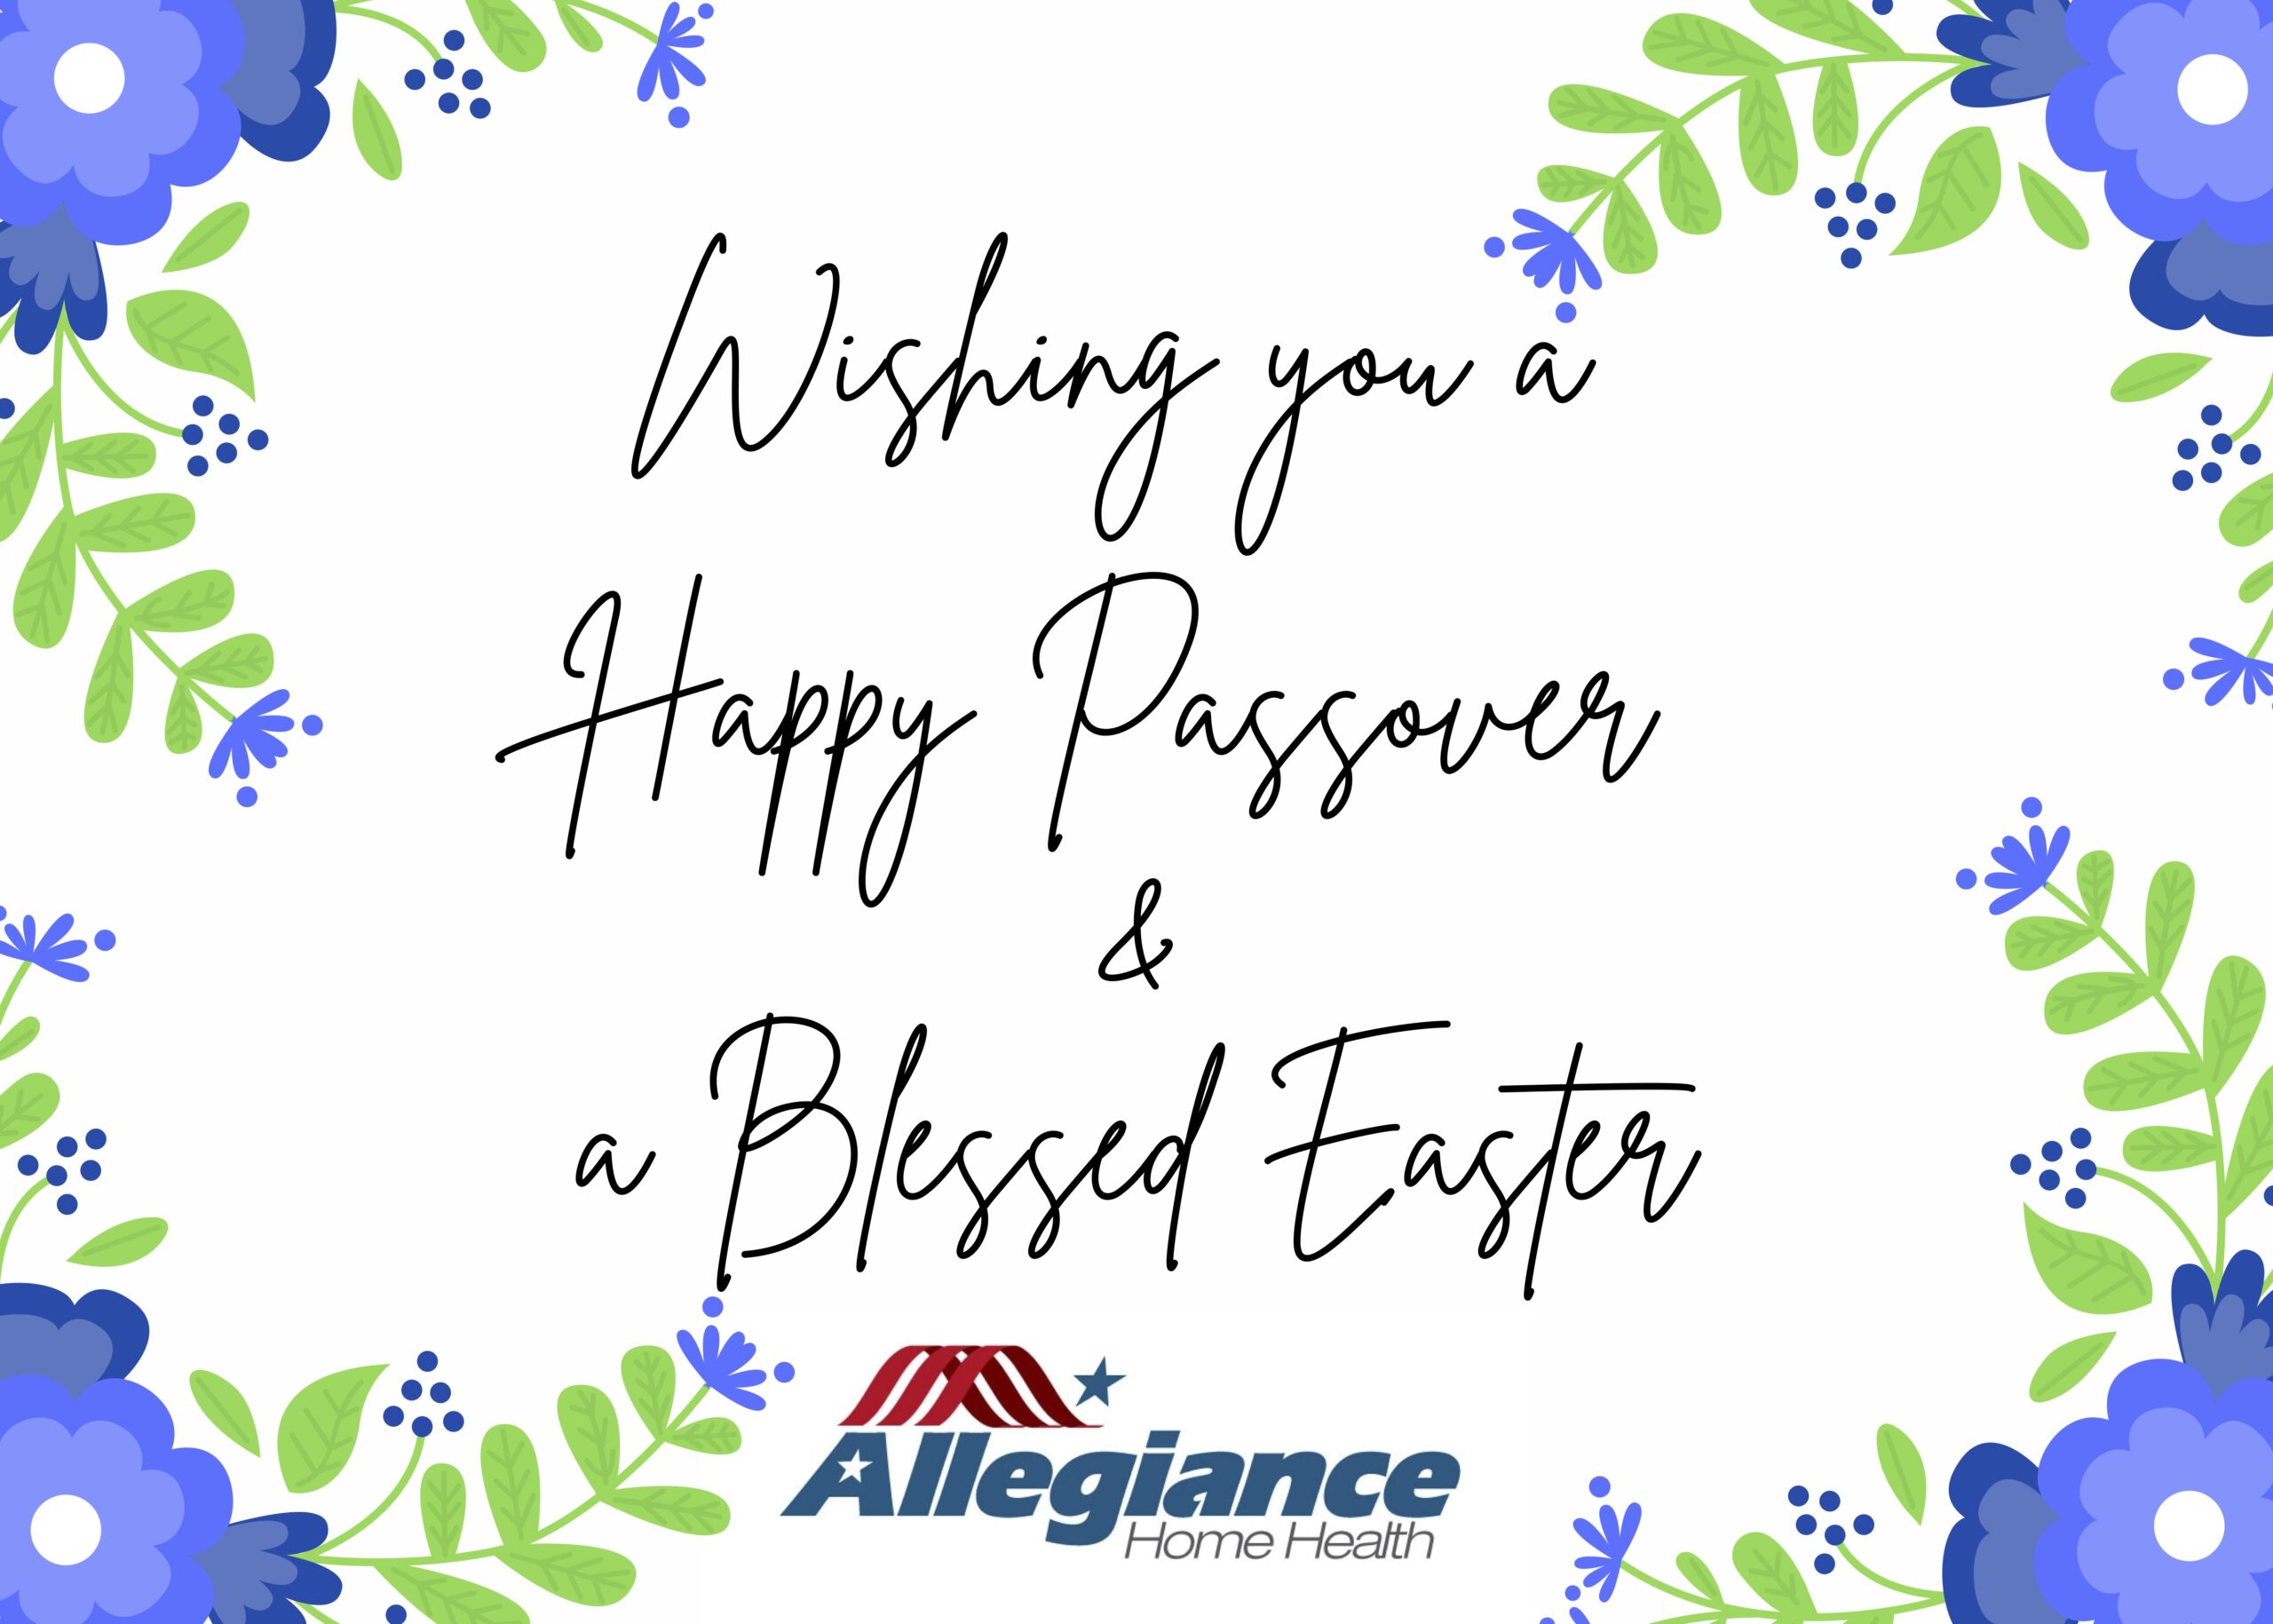 Happy Passover and Blessed Easter